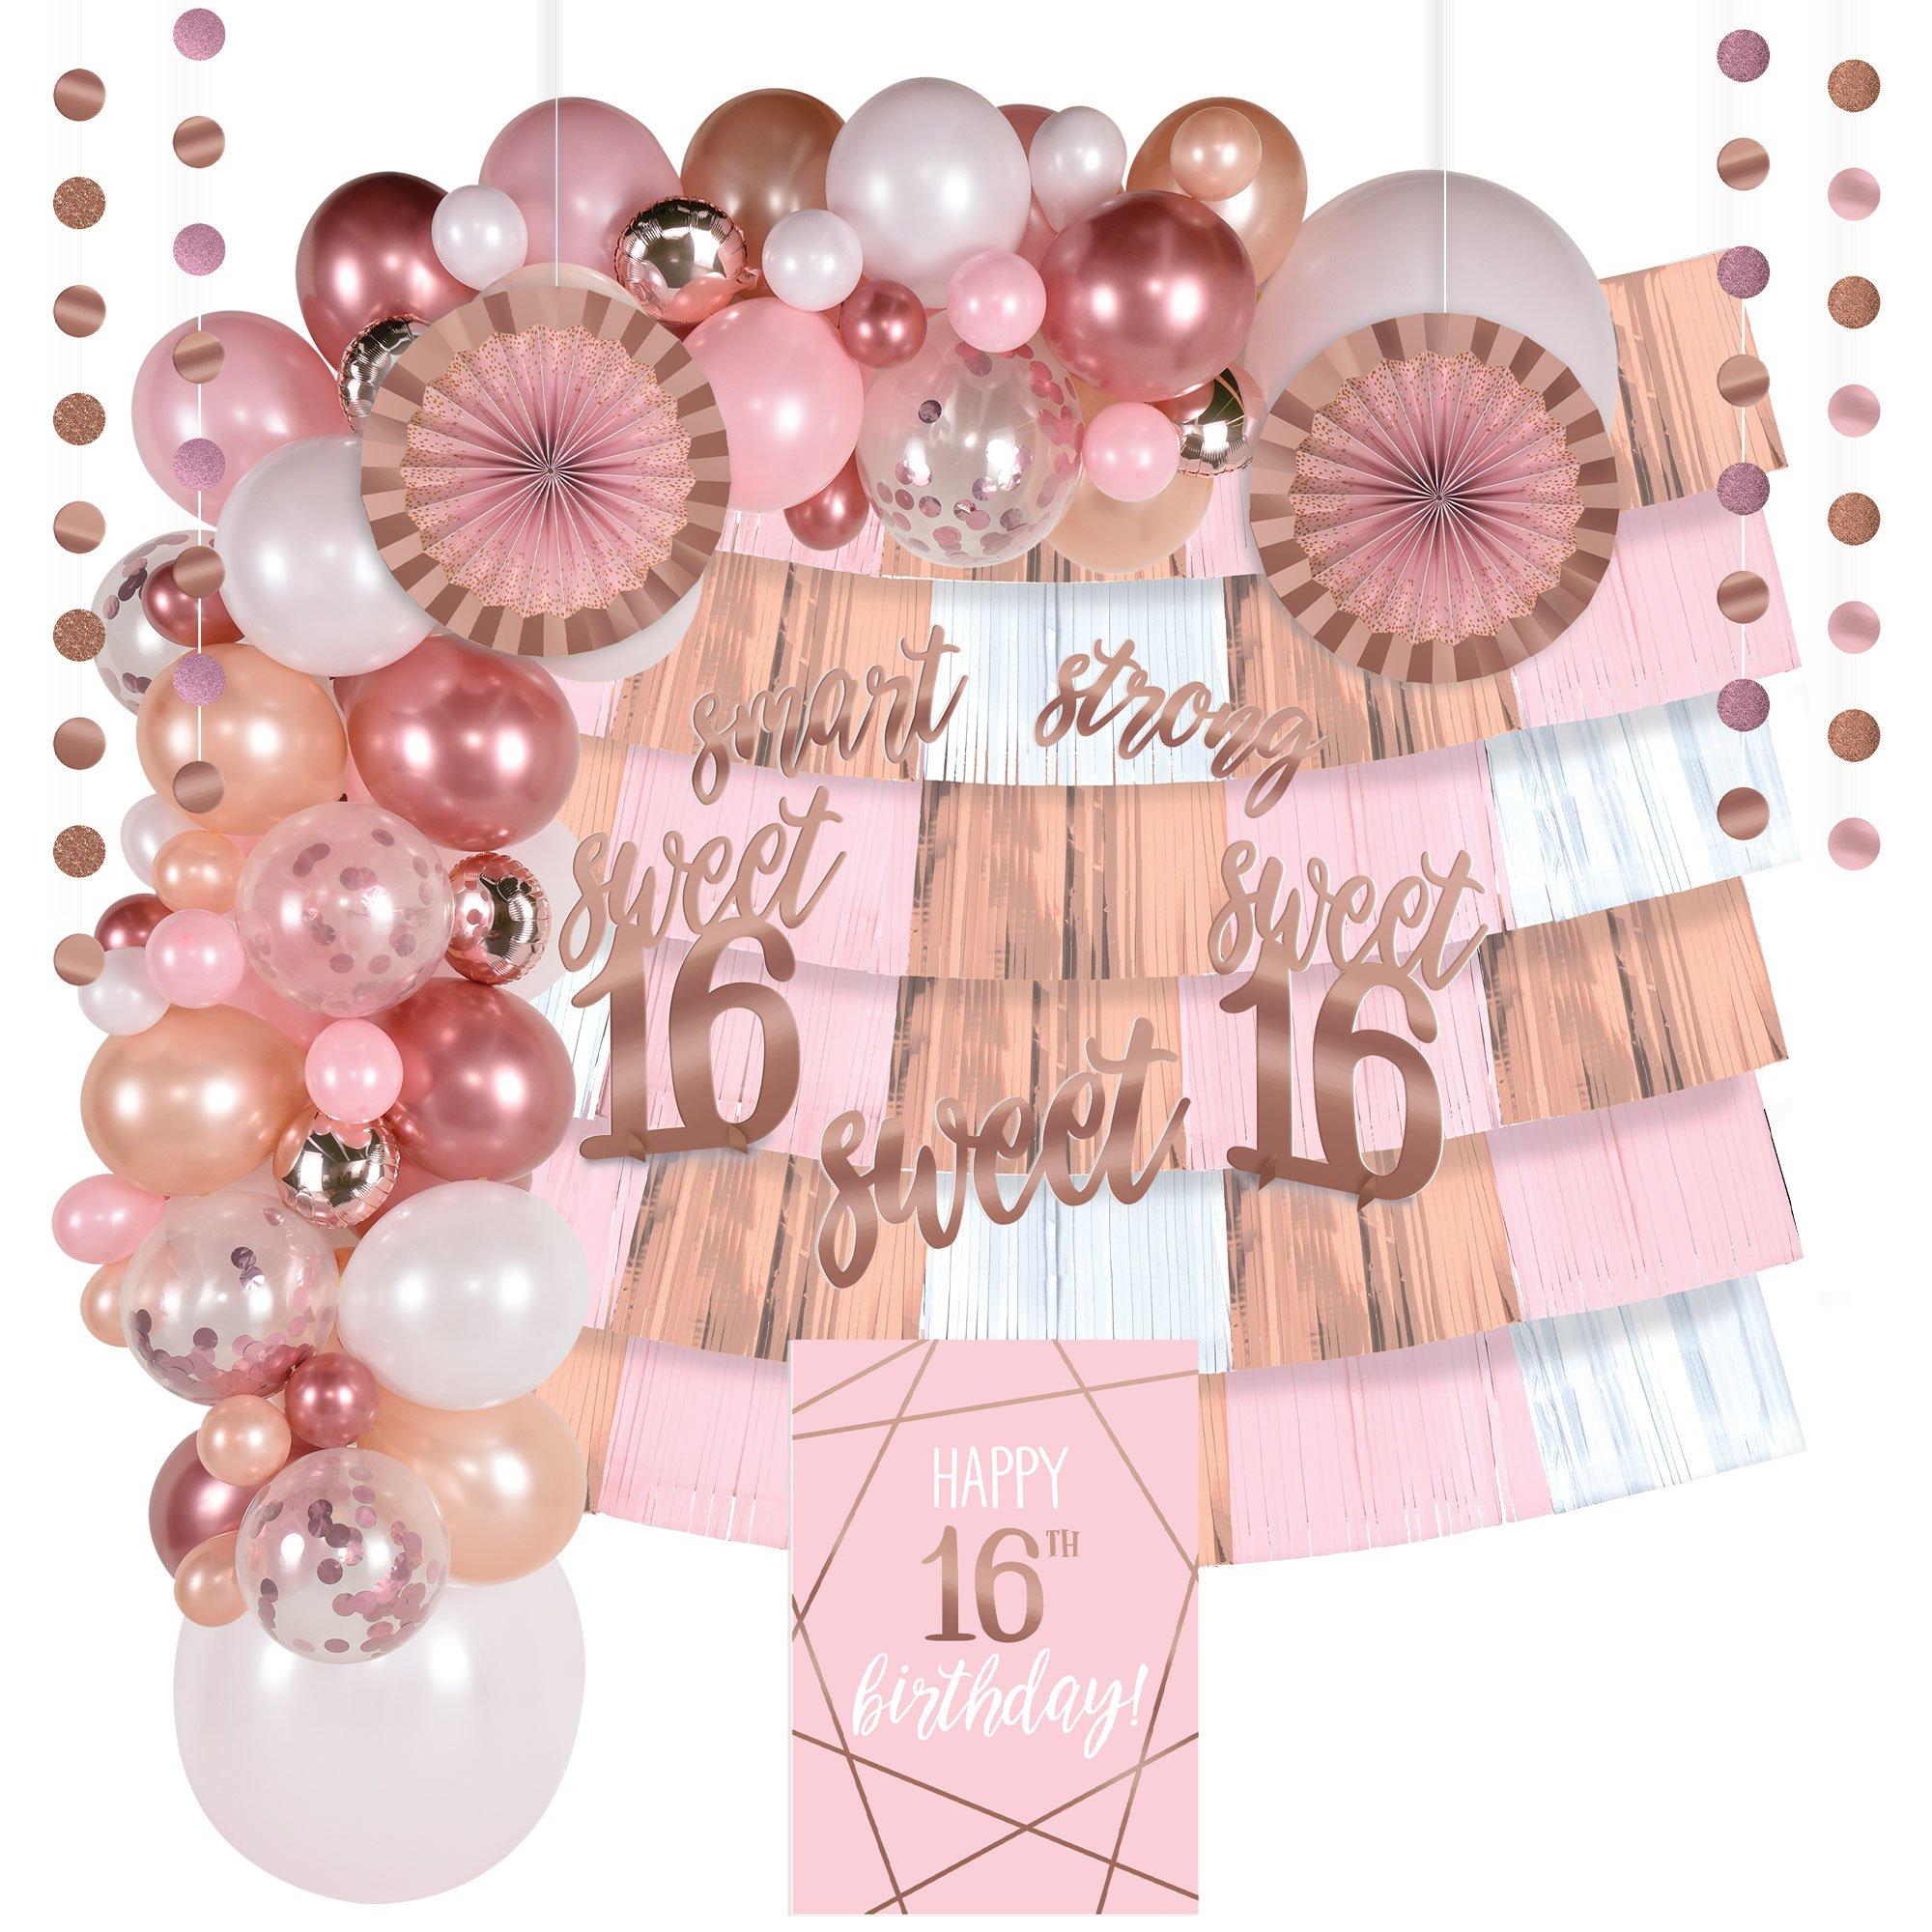 Sweet 16 Birthday Party Supplies, Decorations & Ideas | Party City